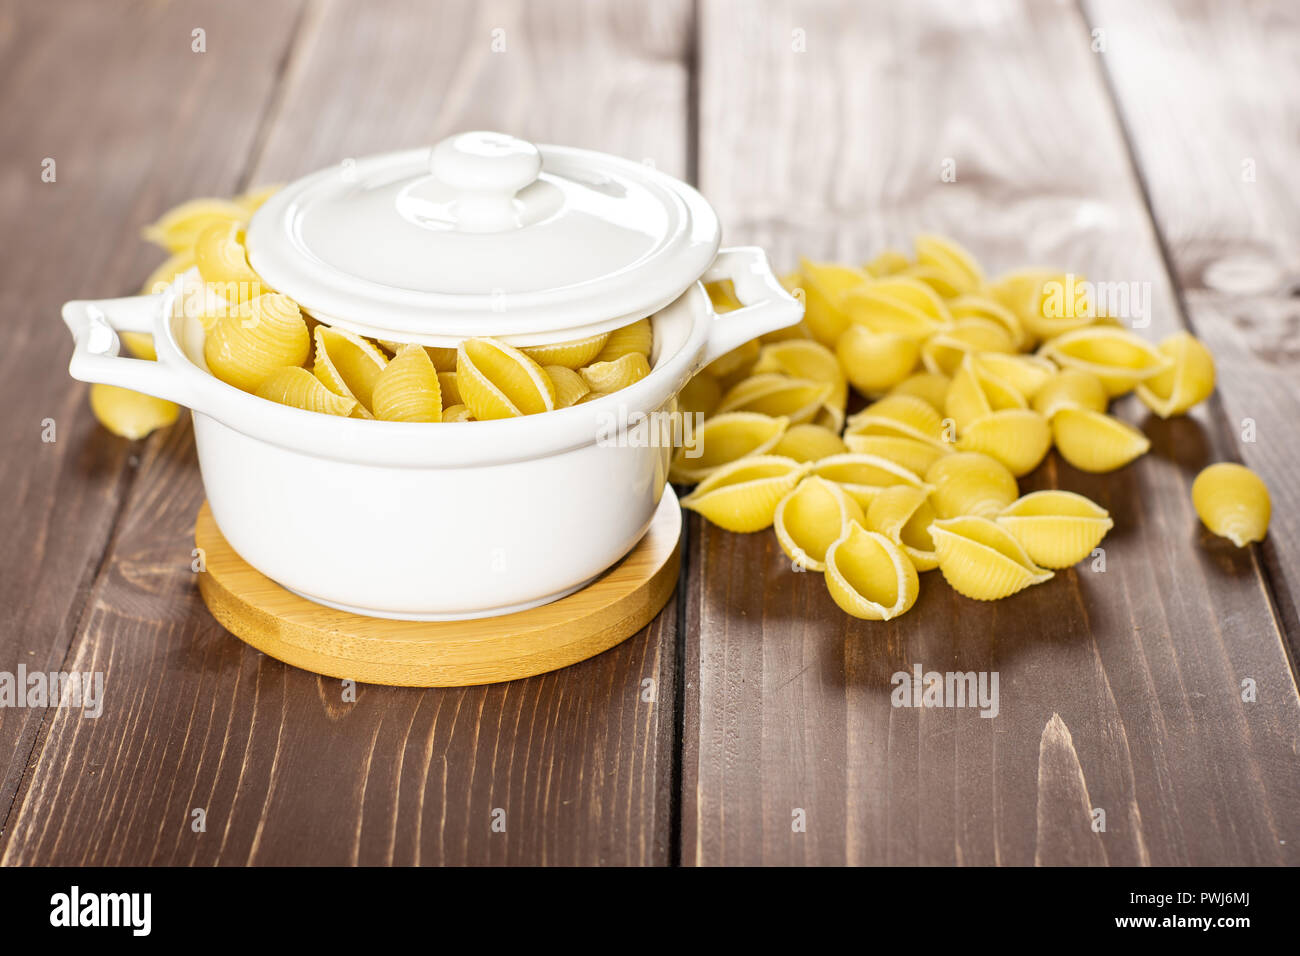 Lot of whole light raw yellow pasta conchiglie variety in a ceramic stewpan on brown wood Stock Photo